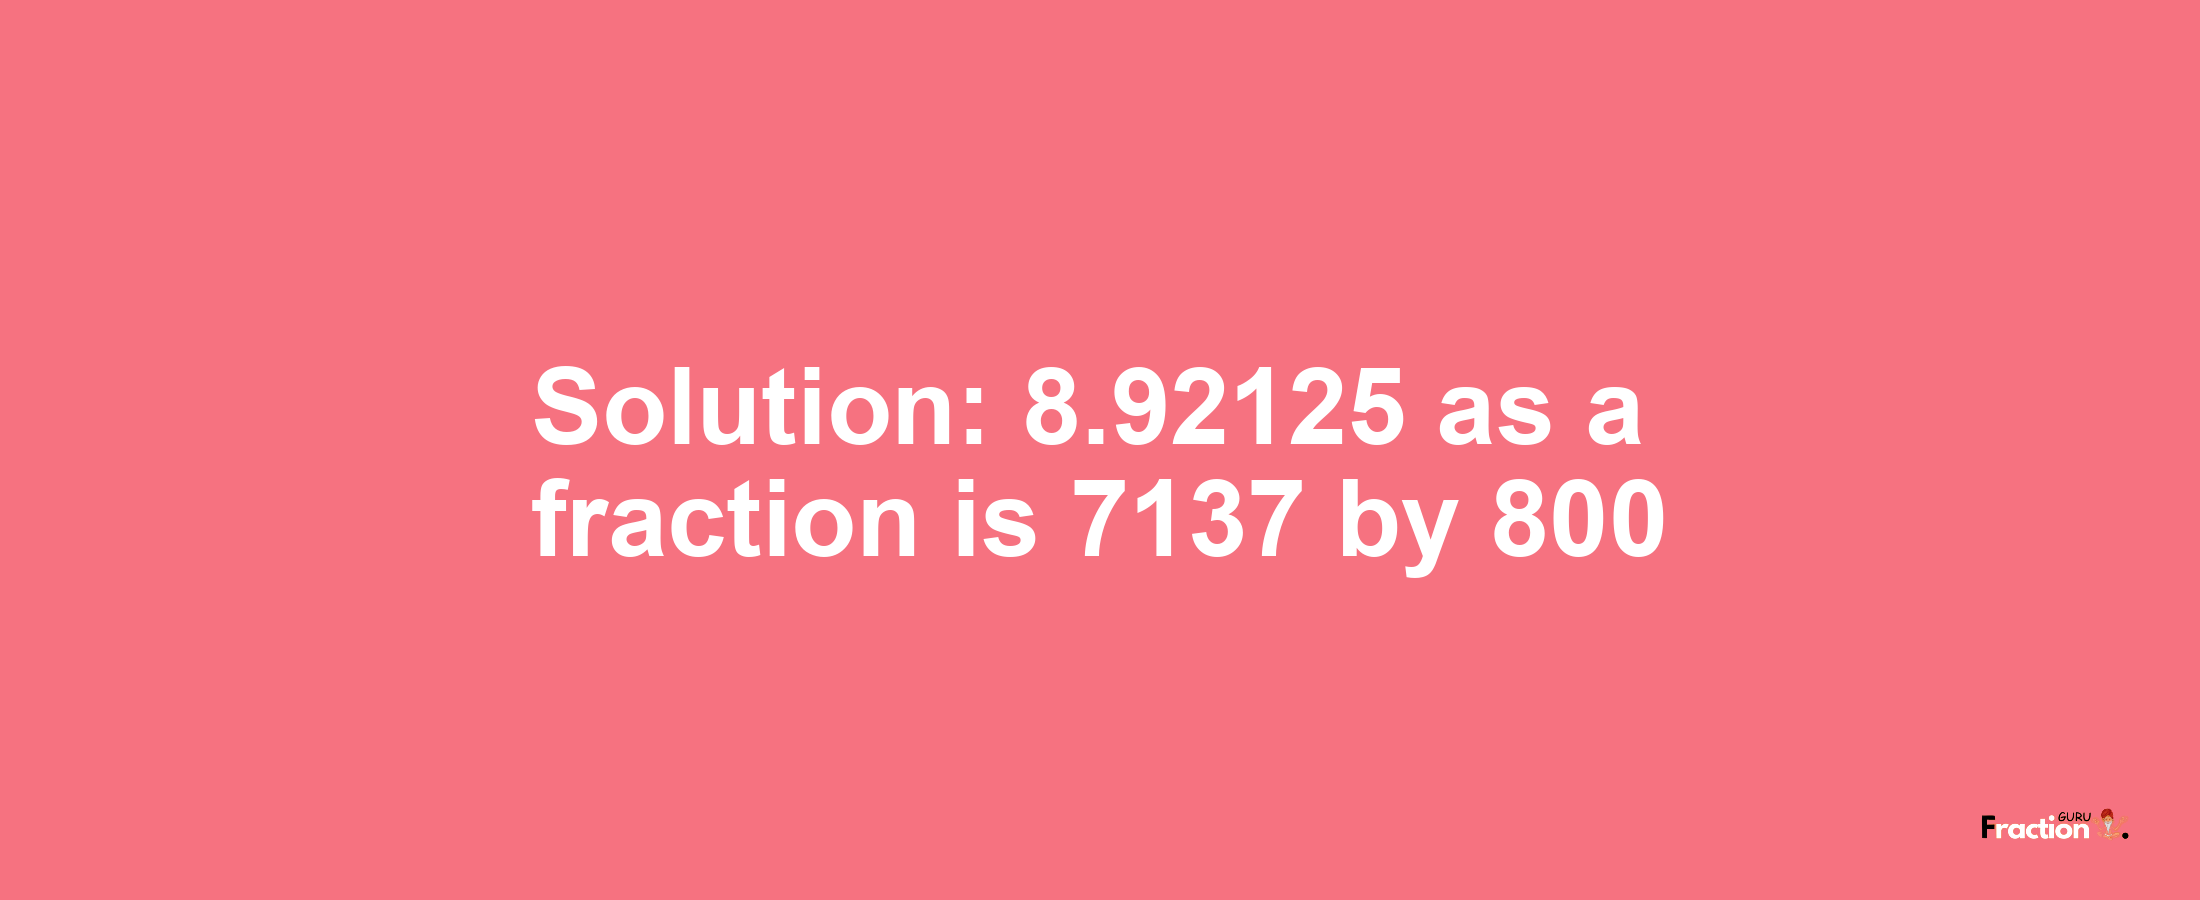 Solution:8.92125 as a fraction is 7137/800